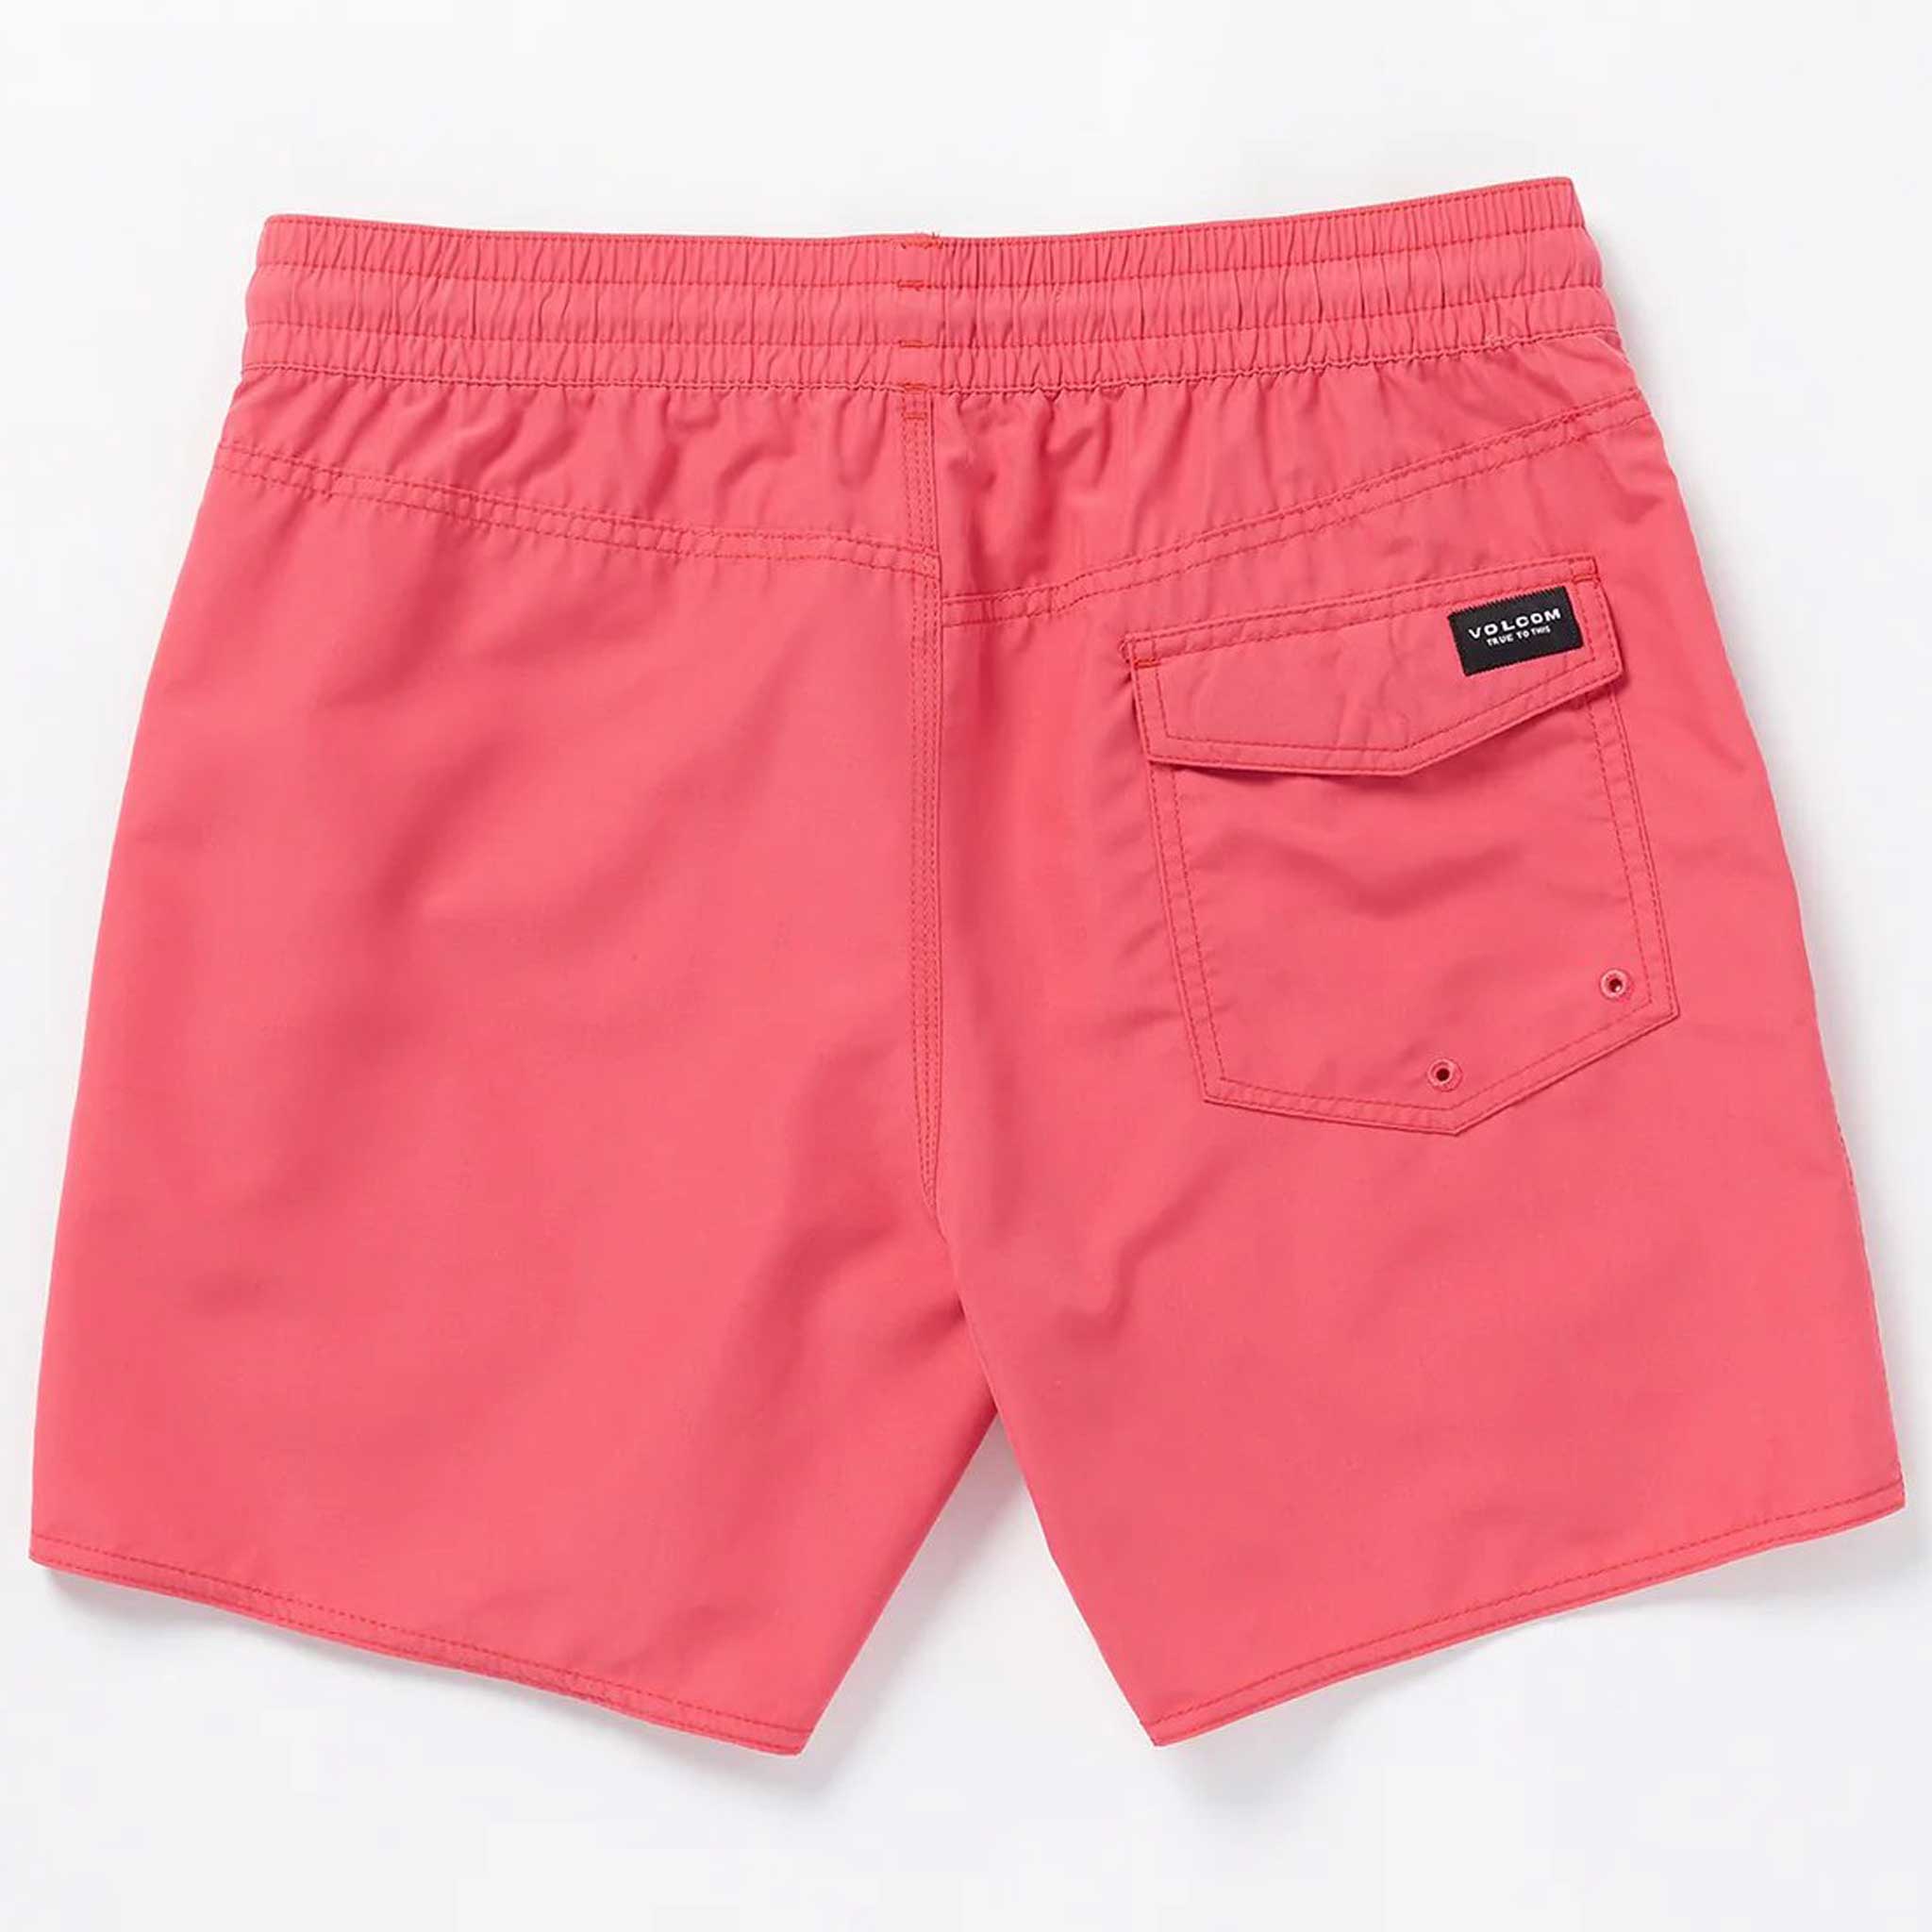 Lido Solid Trunk 16